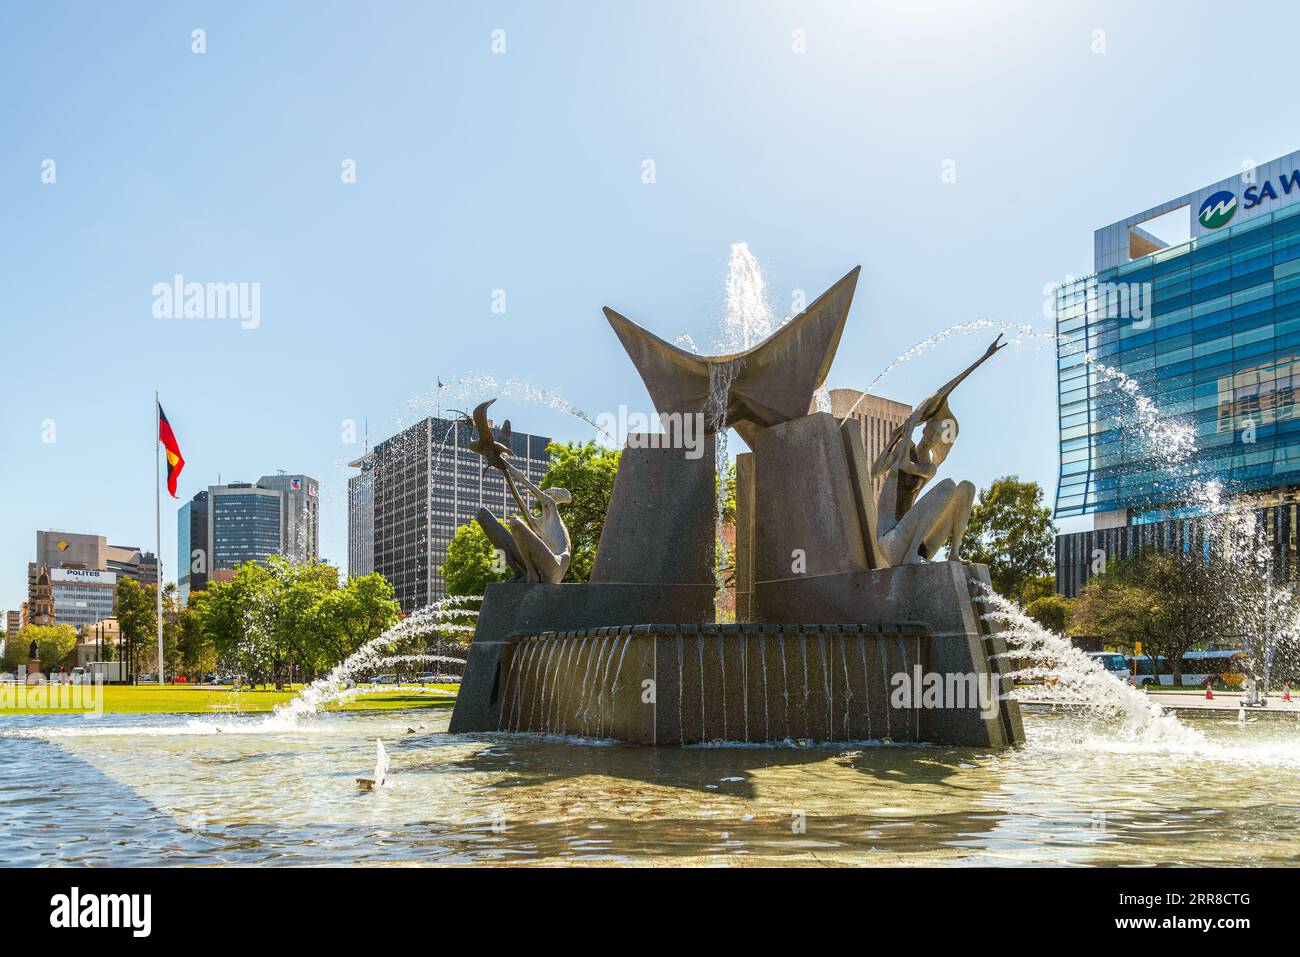 Adelaide, Australia - September 27, 2019: Three Rivers Fountain on Victoria Square in Adelaide City on a bright day Stock Photo